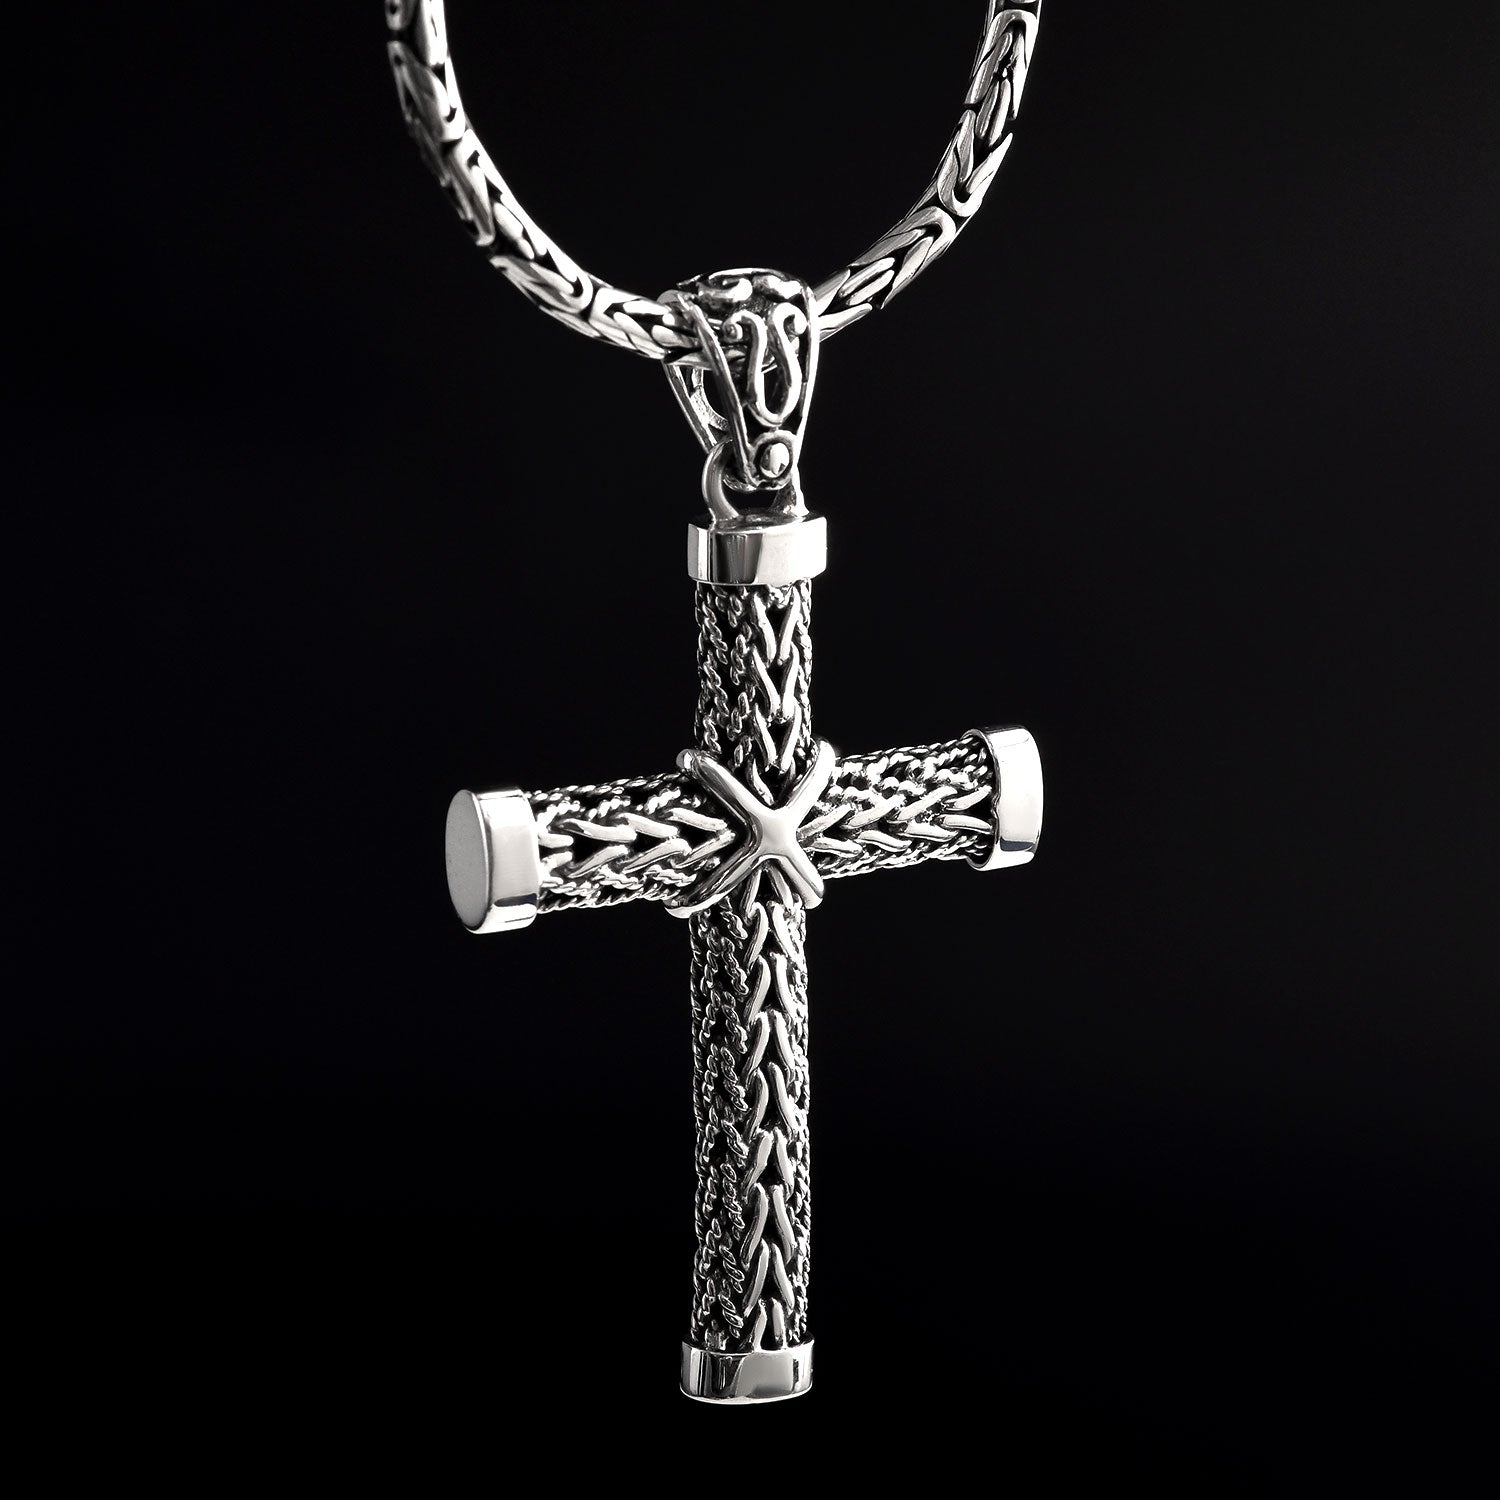 Woven Cross Necklace